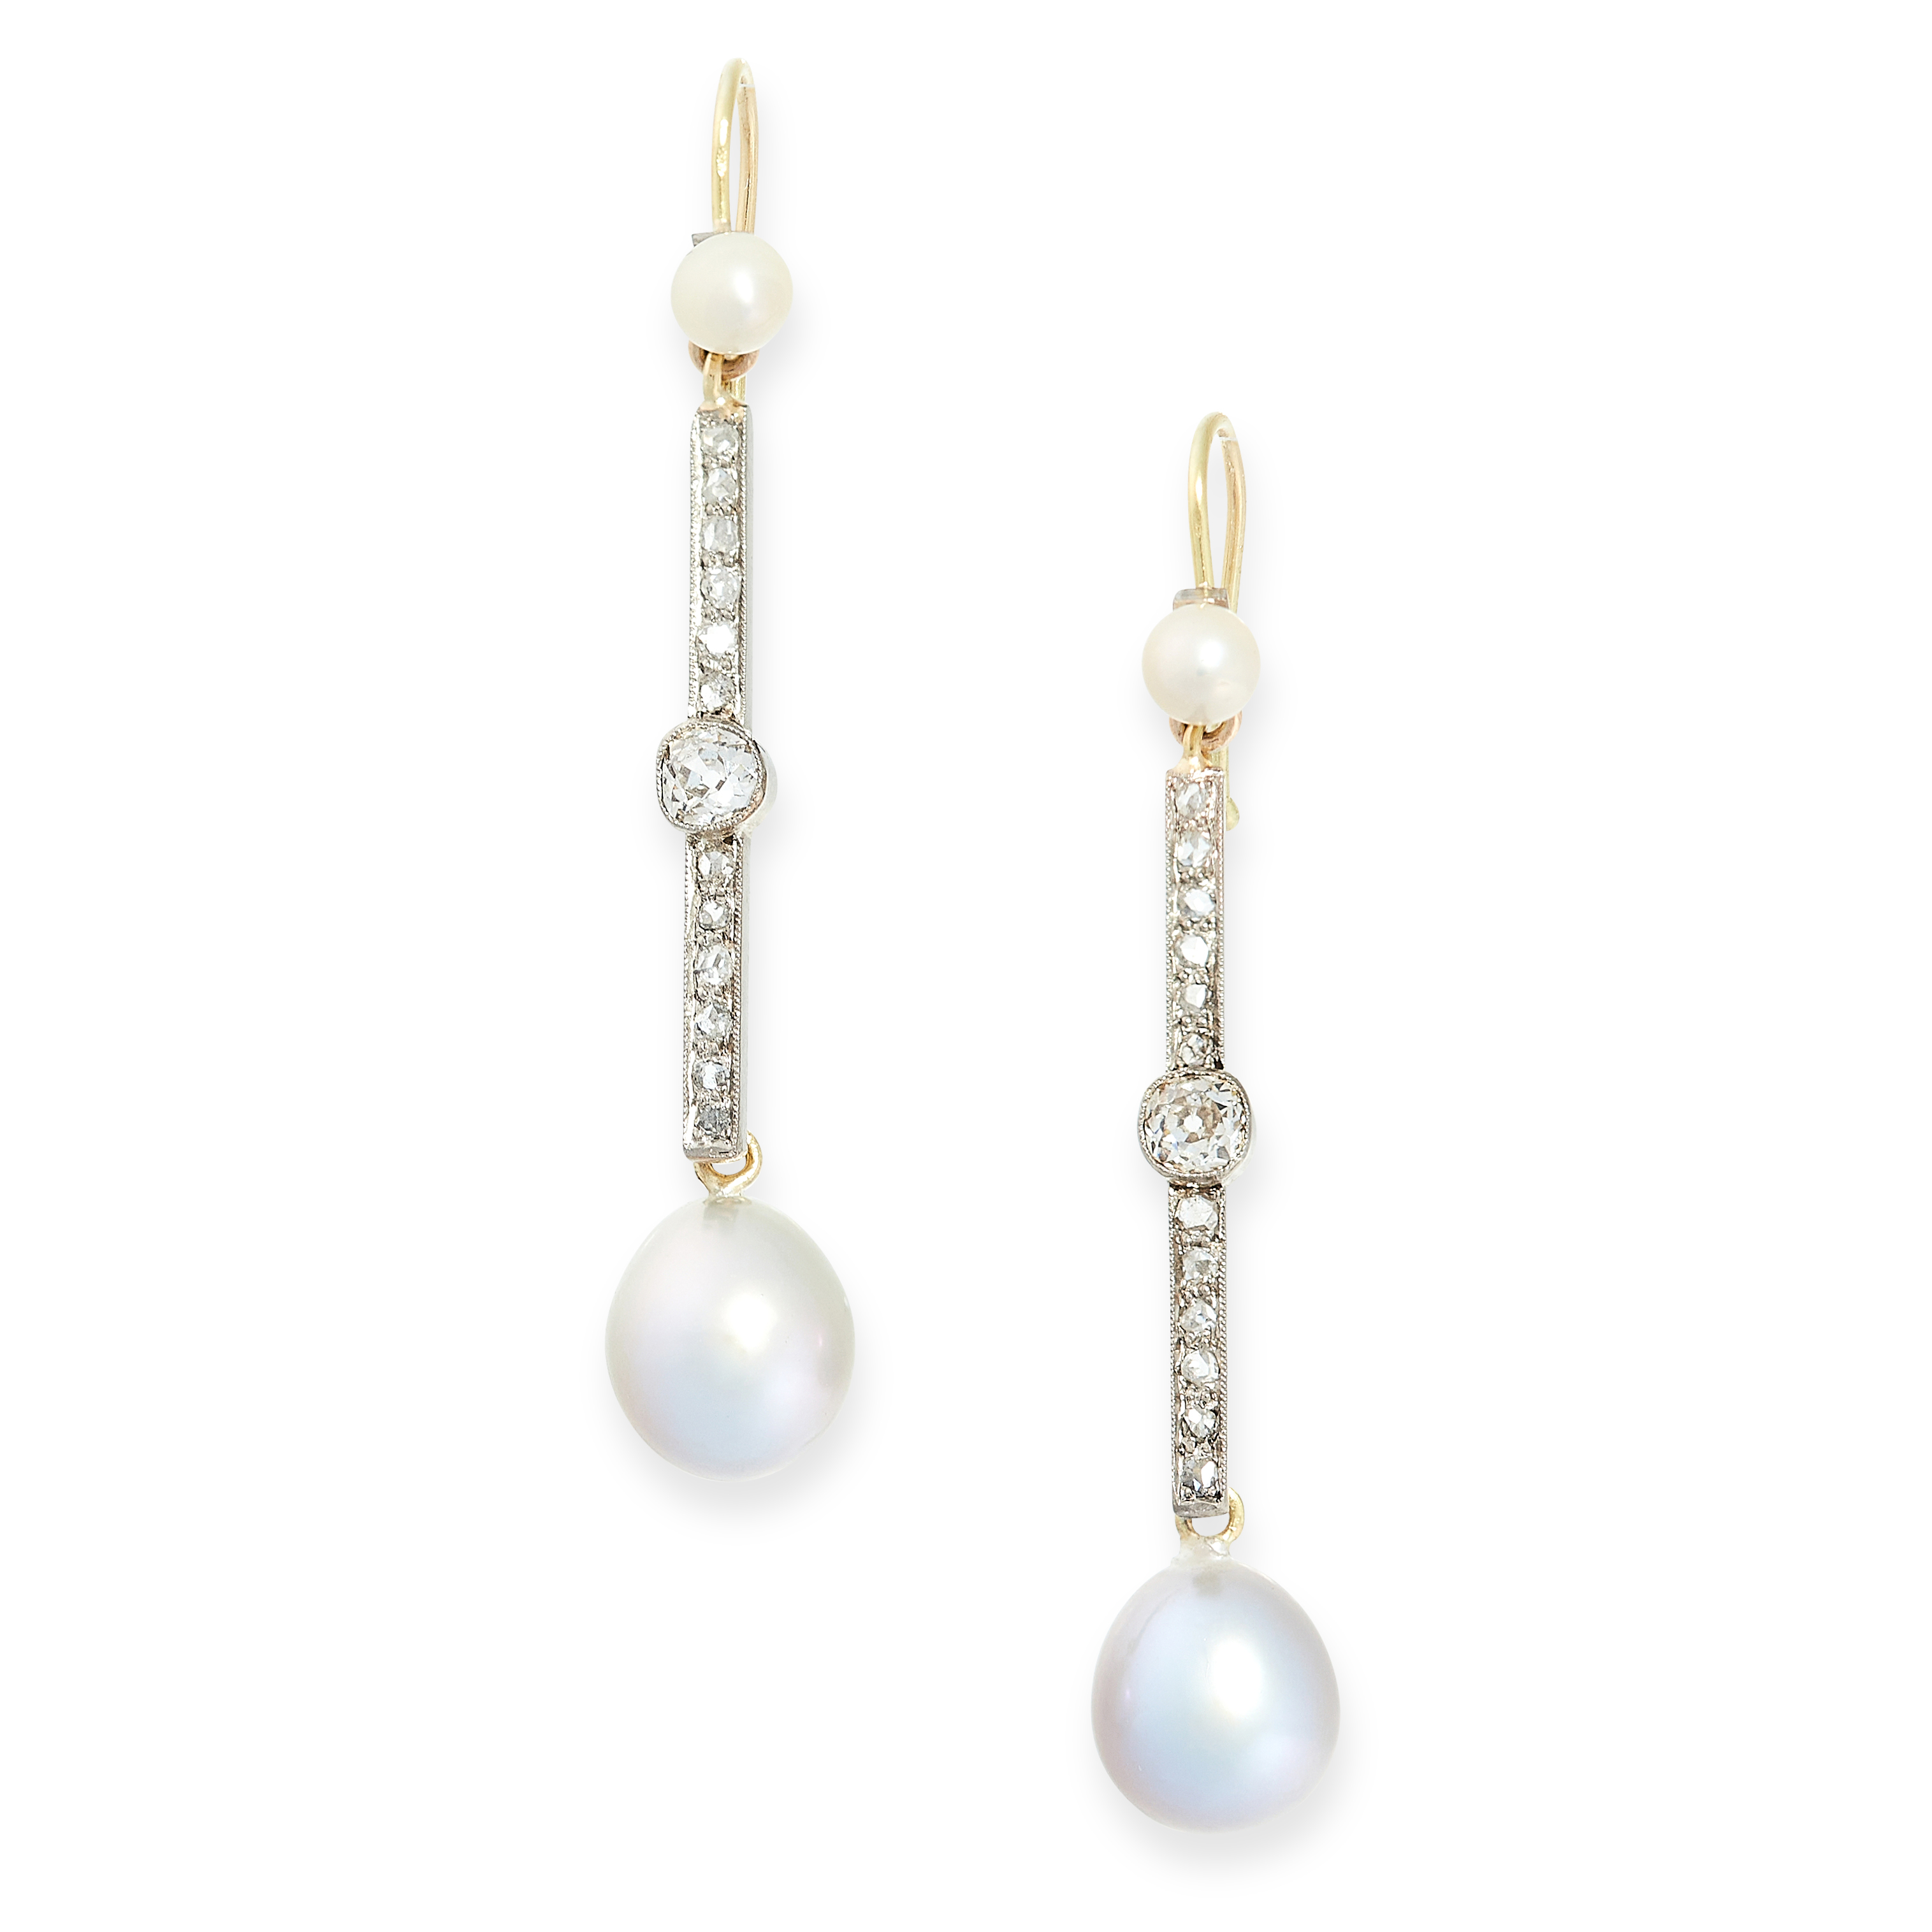 PAIR OF PEARL AND DIAMOND EARRINGS, EARLY 20TH CENTURY each is set with a pearl suspending a bar